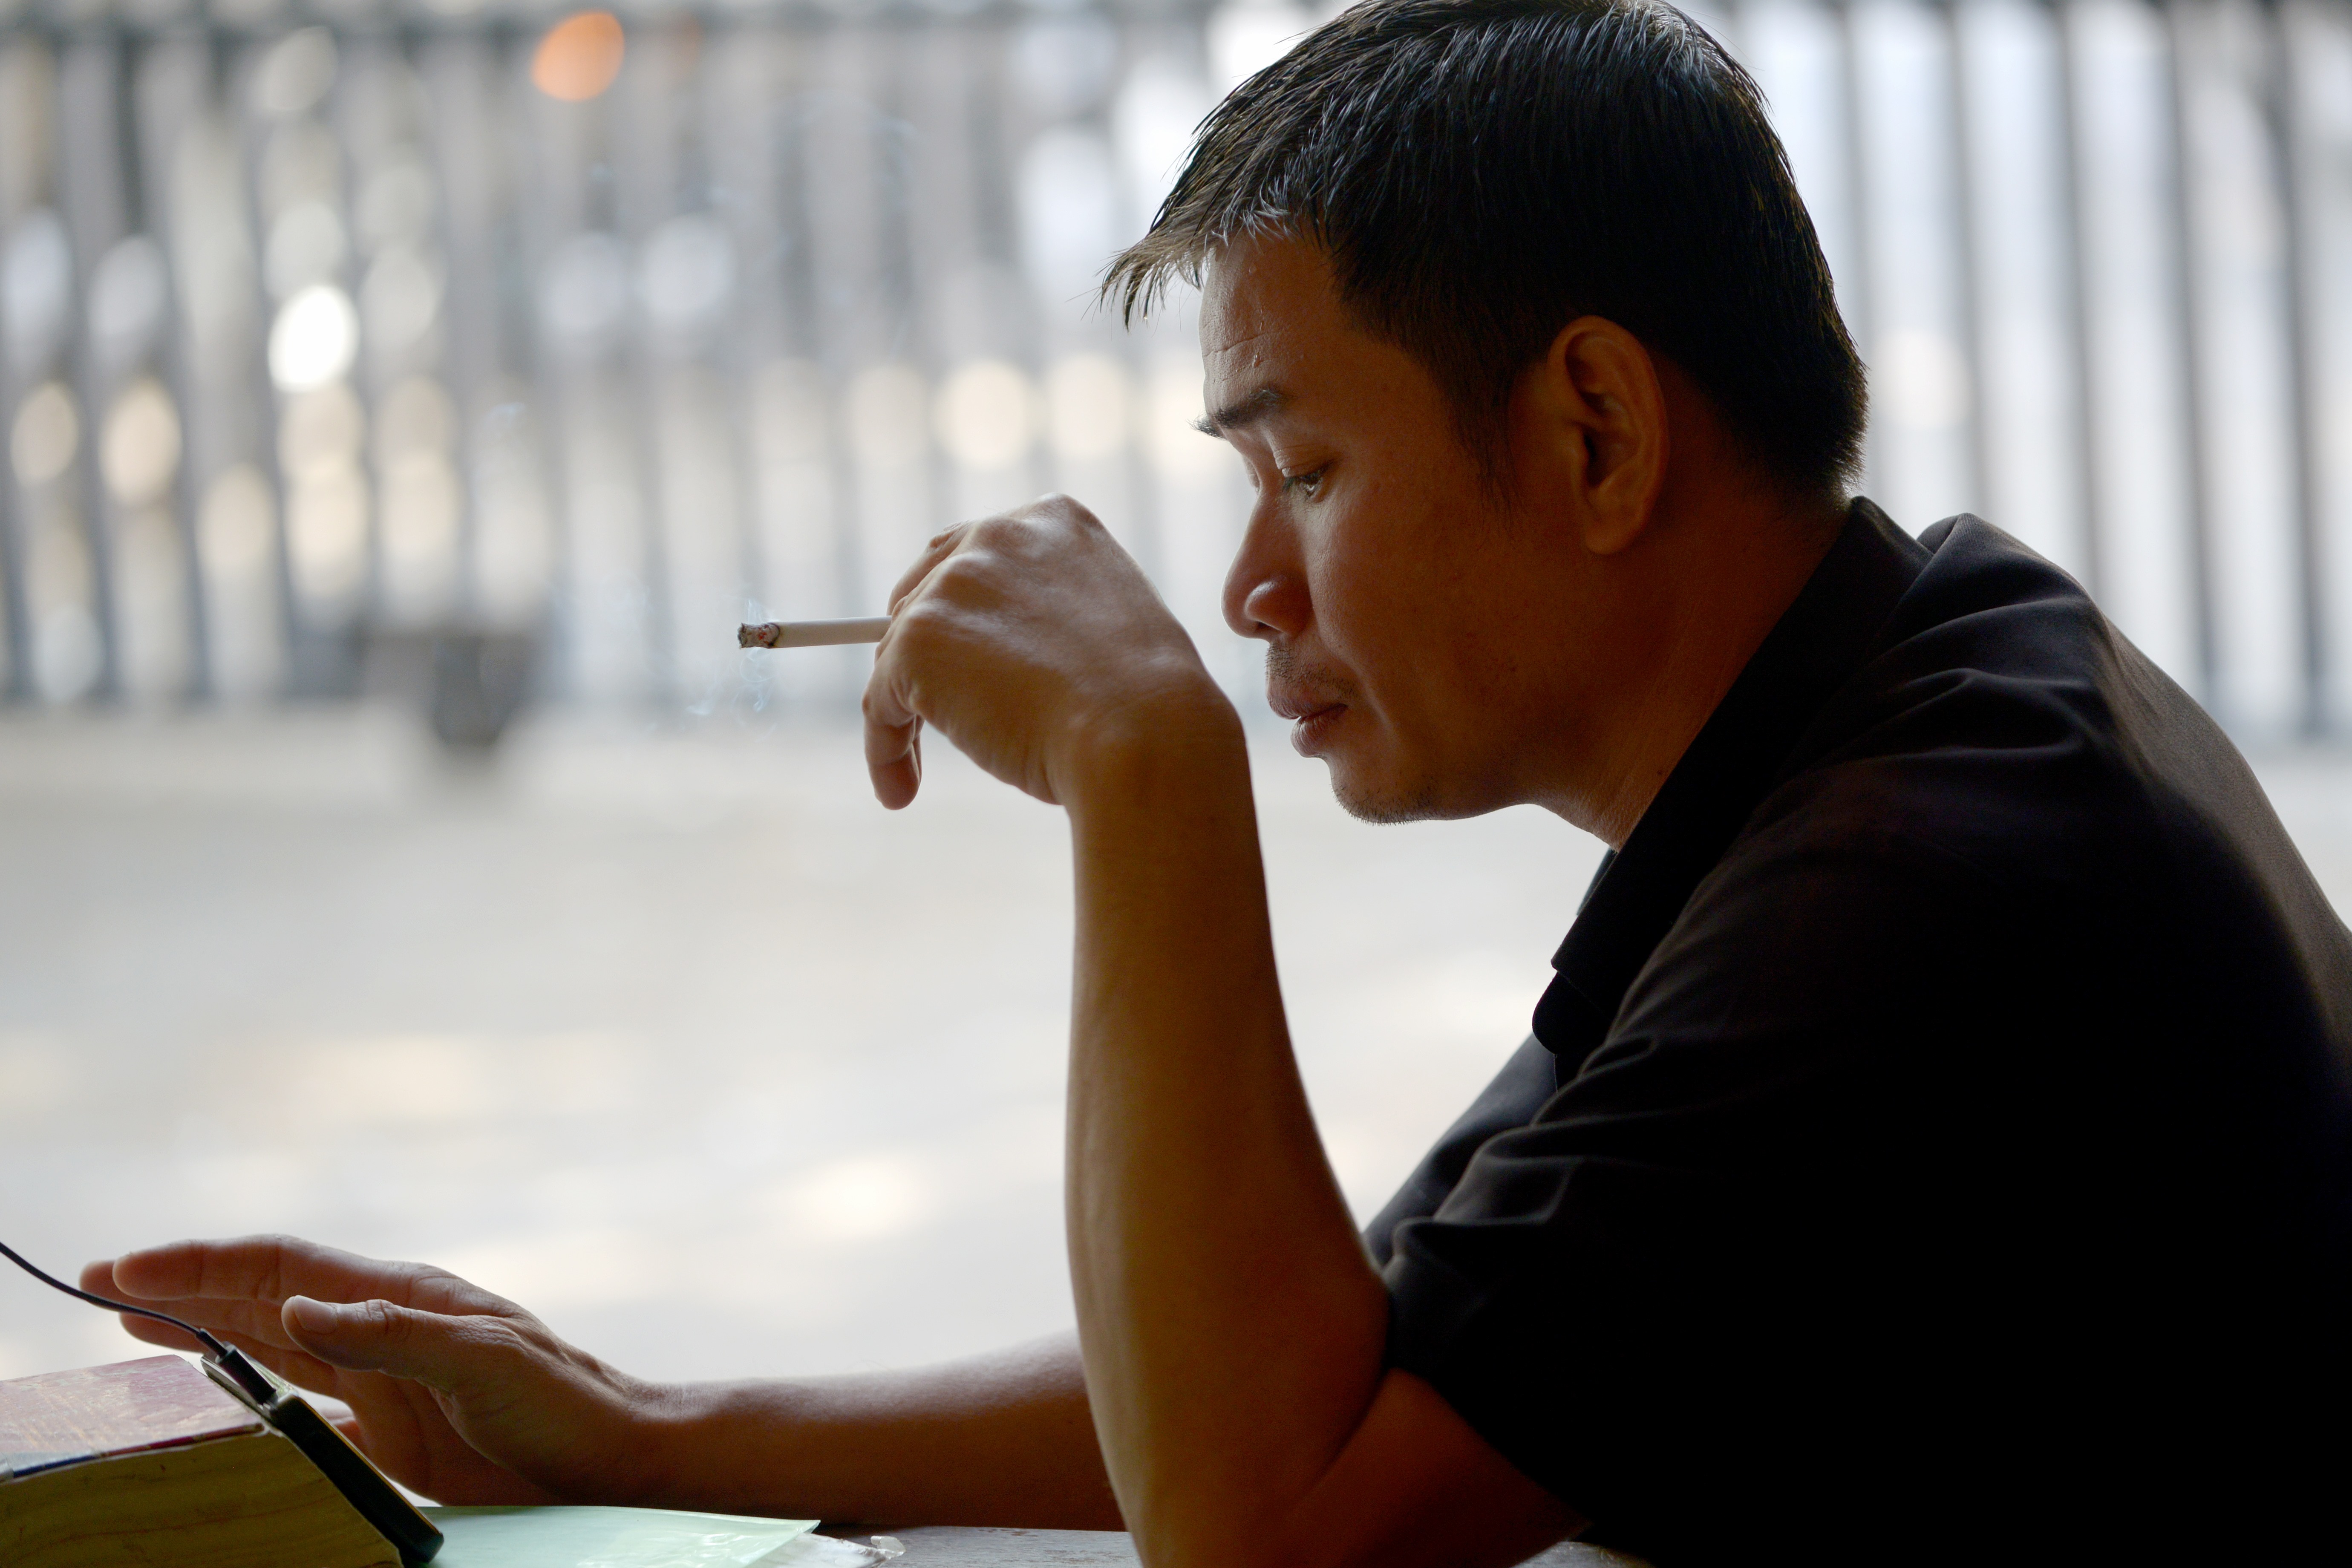 A Cambodian man smokes a cigarette as he plays with his smartphone in Phnom Penh on January 31, 2017. Smoking cost the world economy more than 1.4 trillion USD in 2012, and sucked up a twentieth of health care spending, a study said on January 31. / AFP PHOTO / TANG CHHIN SOTHY